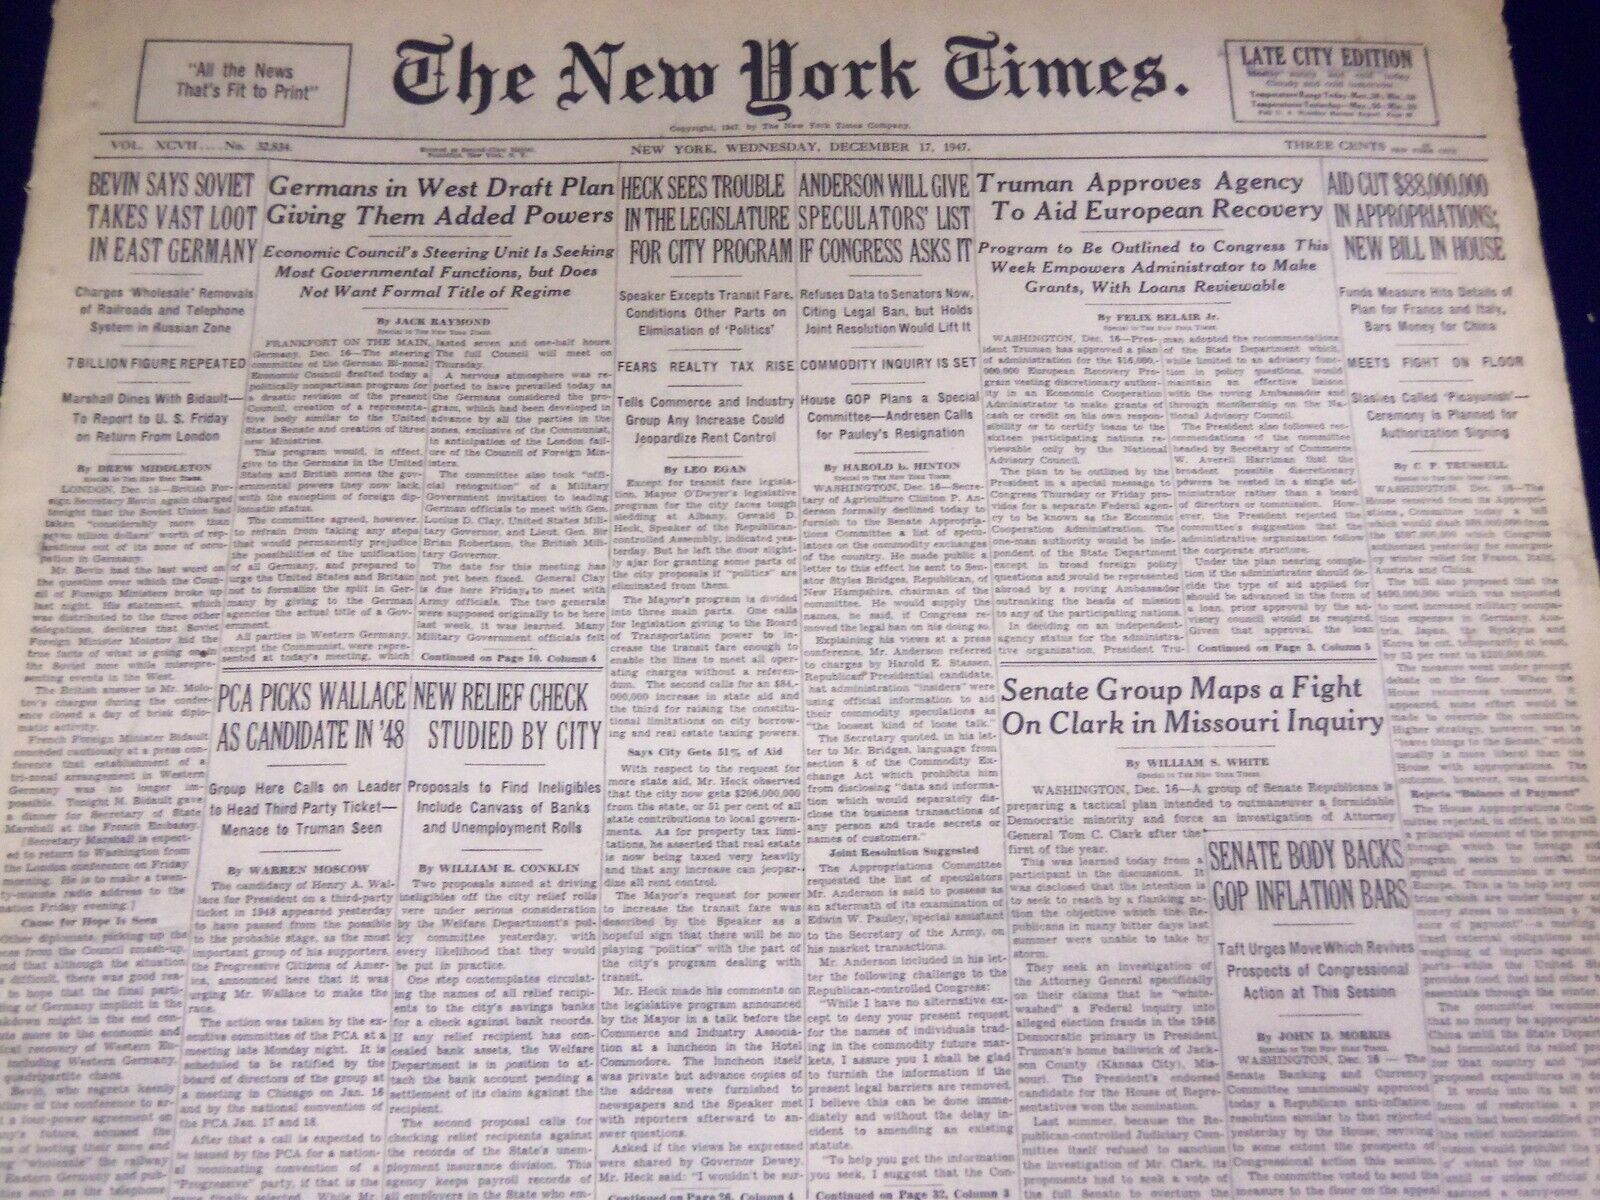 1947 DECEMBER 17 NEW YORK TIMES - TRUMAN TO AID EUROPEAN RECOVERY - NT 3296